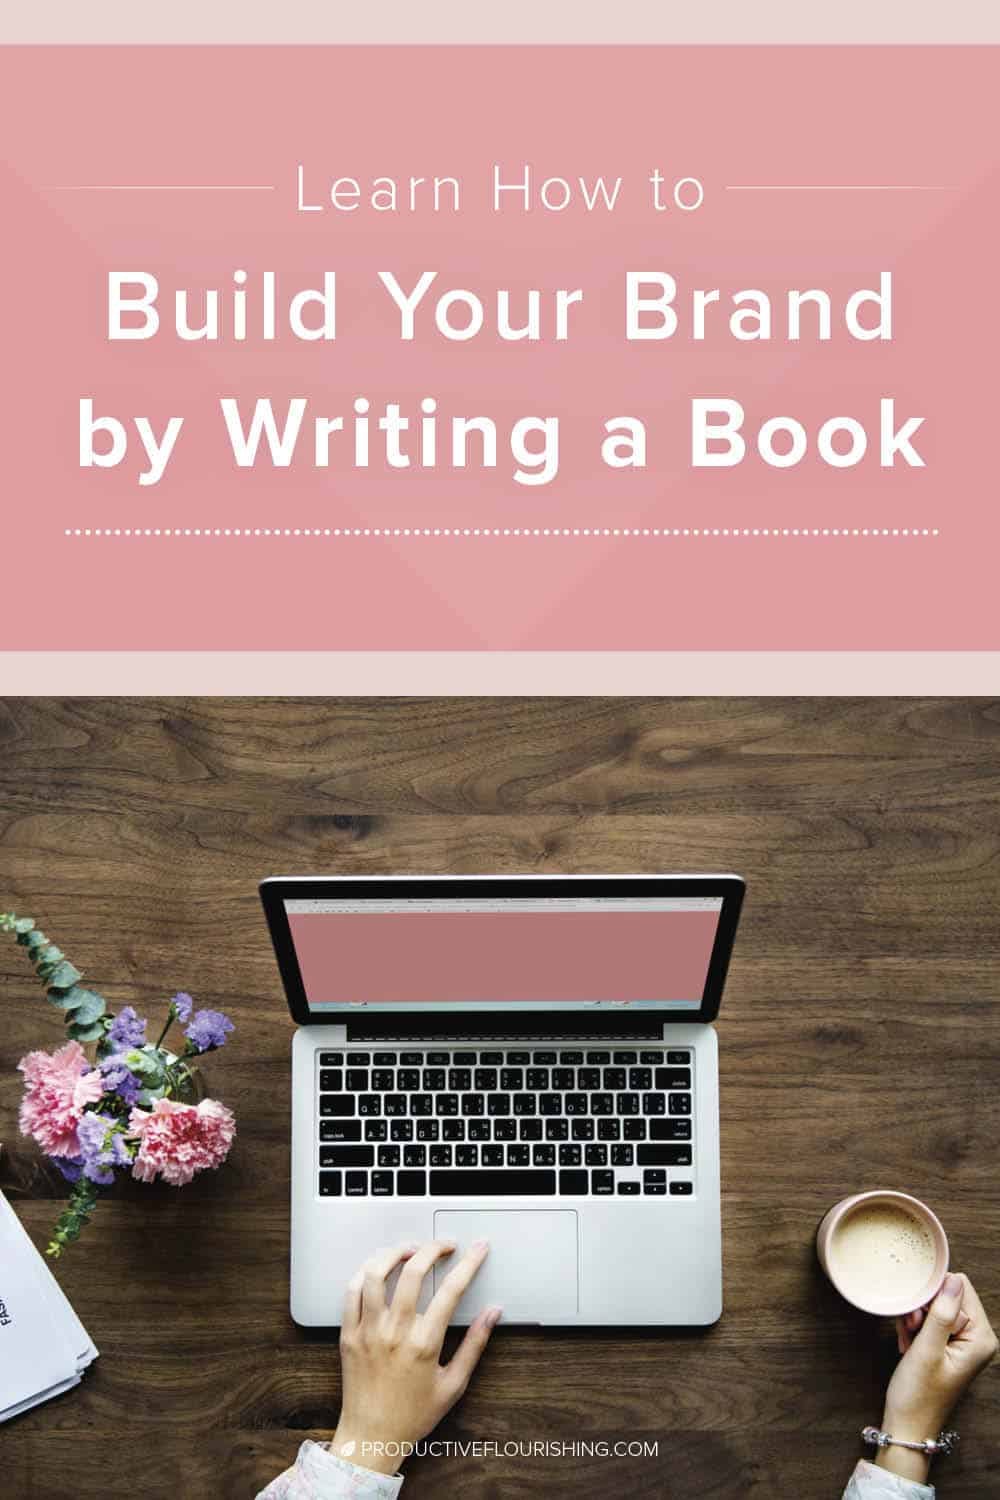 Read about three reasons you should write a book (or booklet) about your business and grow your brand through it. With a book or booklet, it’s like getting several months’ worth of the benefits of social media posts in one big shot. #smallbusinessbrand #entrepreneur #productiveflourishing